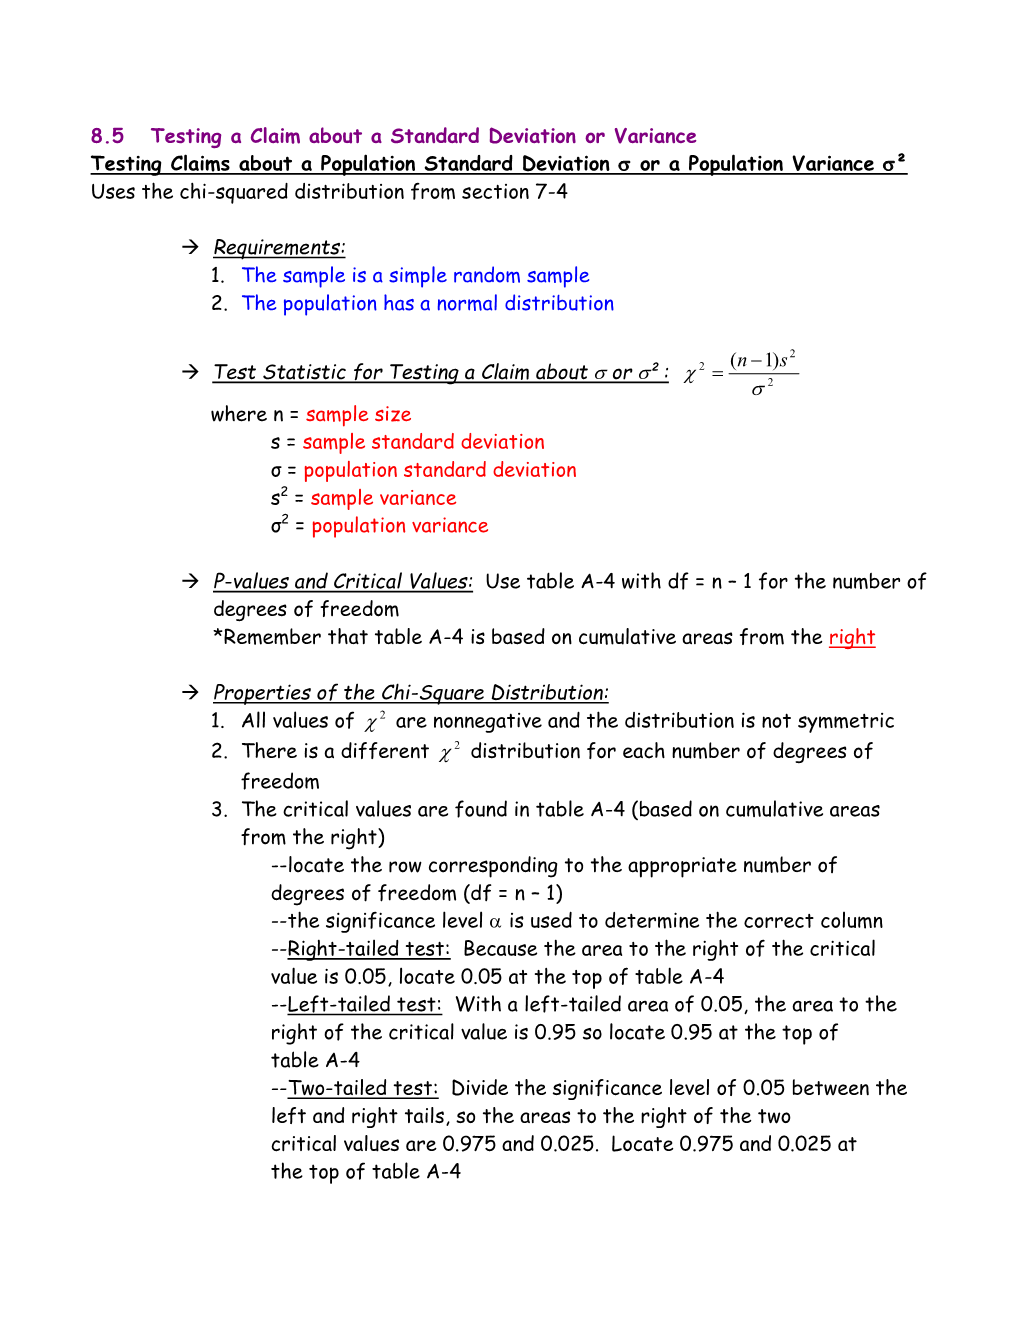 8.5 Testing a Claim About a Standard Deviation Or Variance